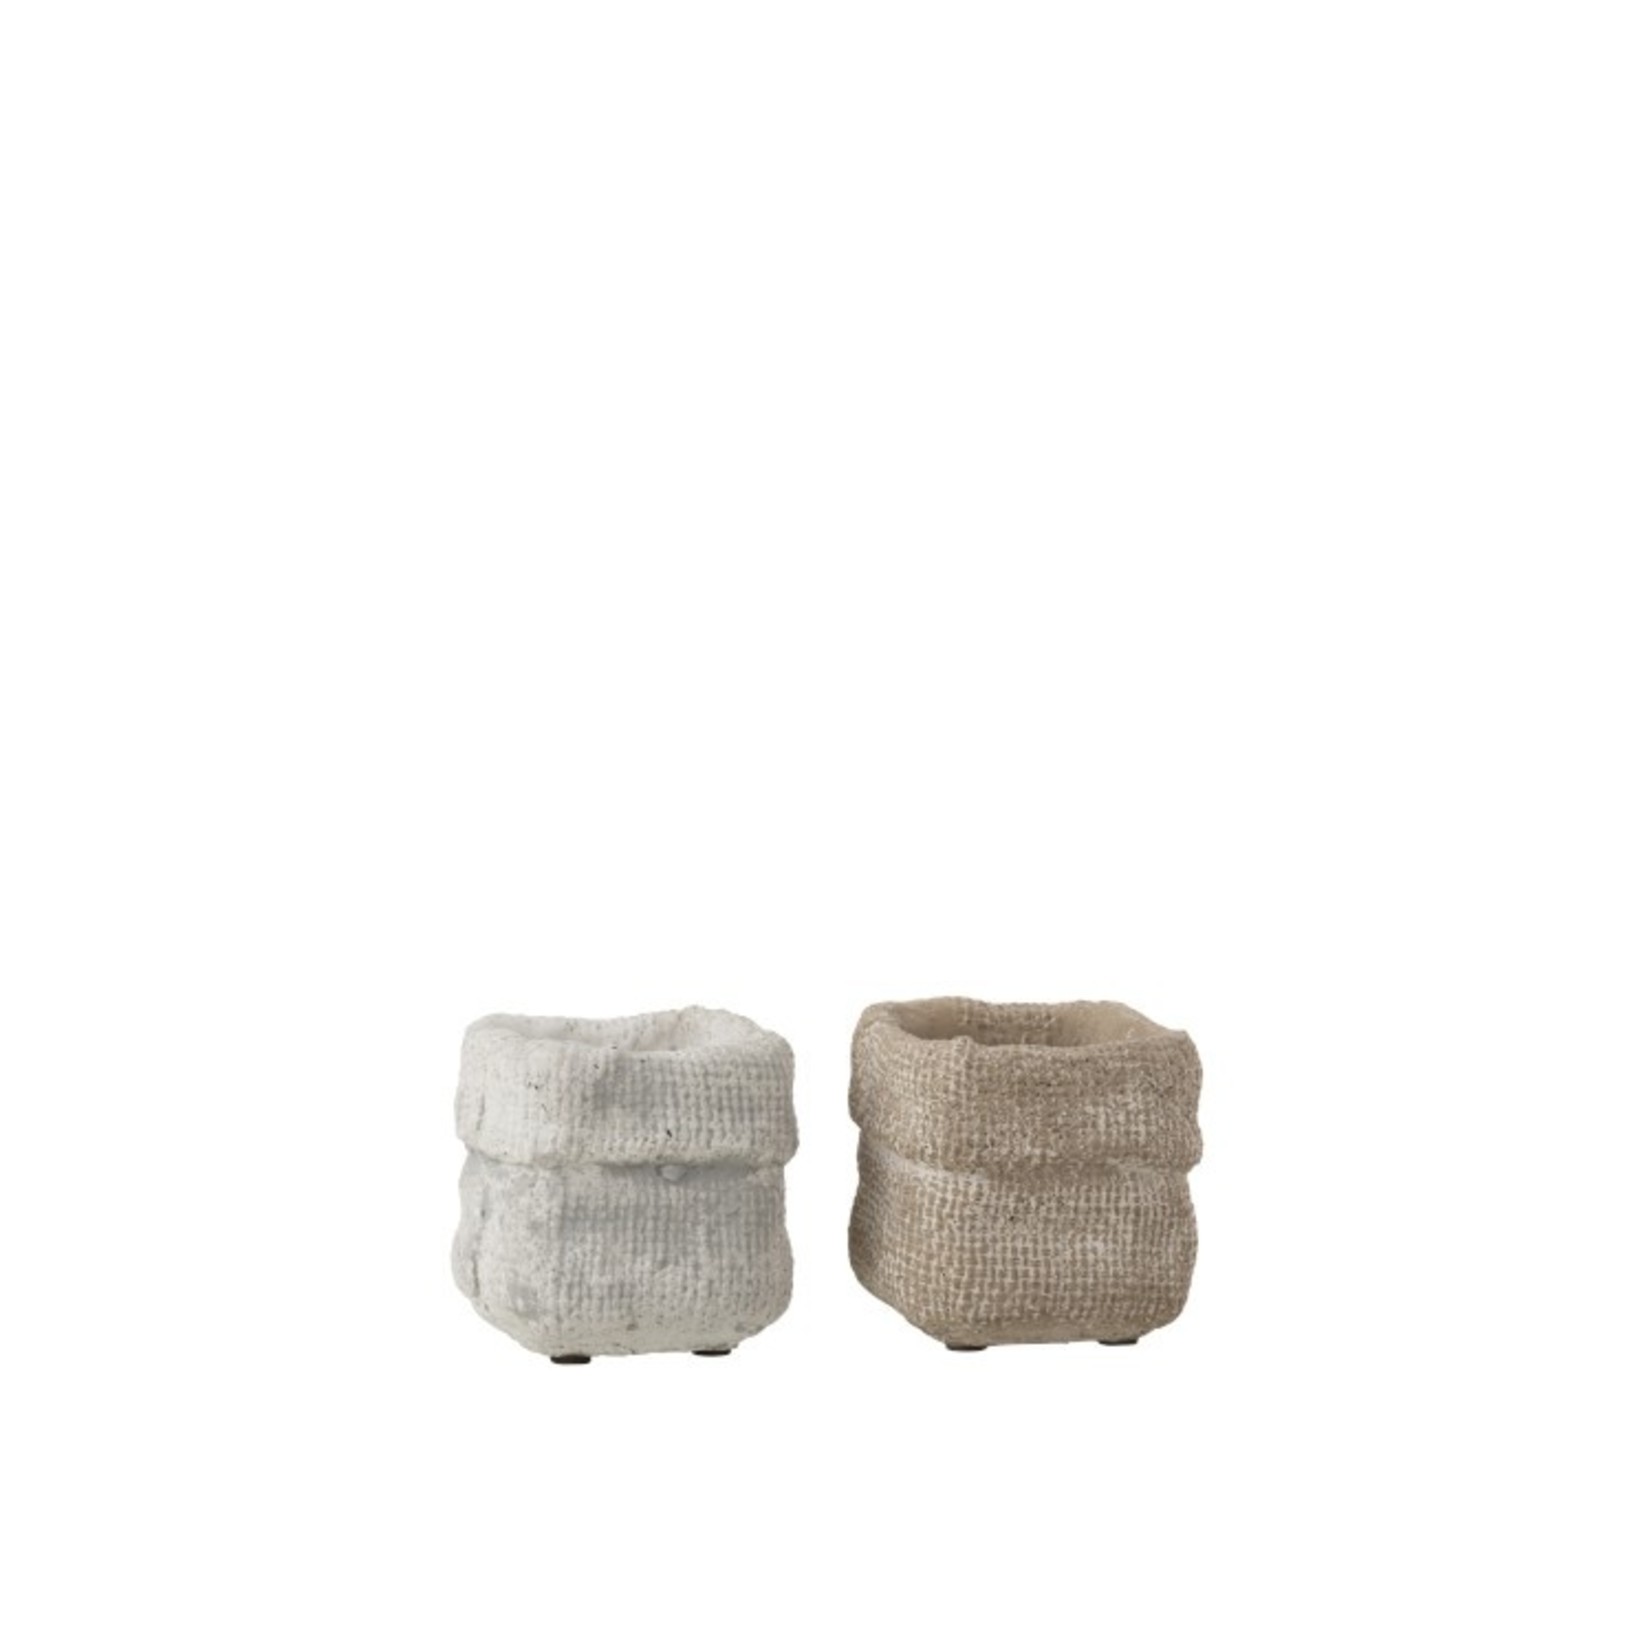 J-Line Flowerpot Square Cement White Beige - Extra Small